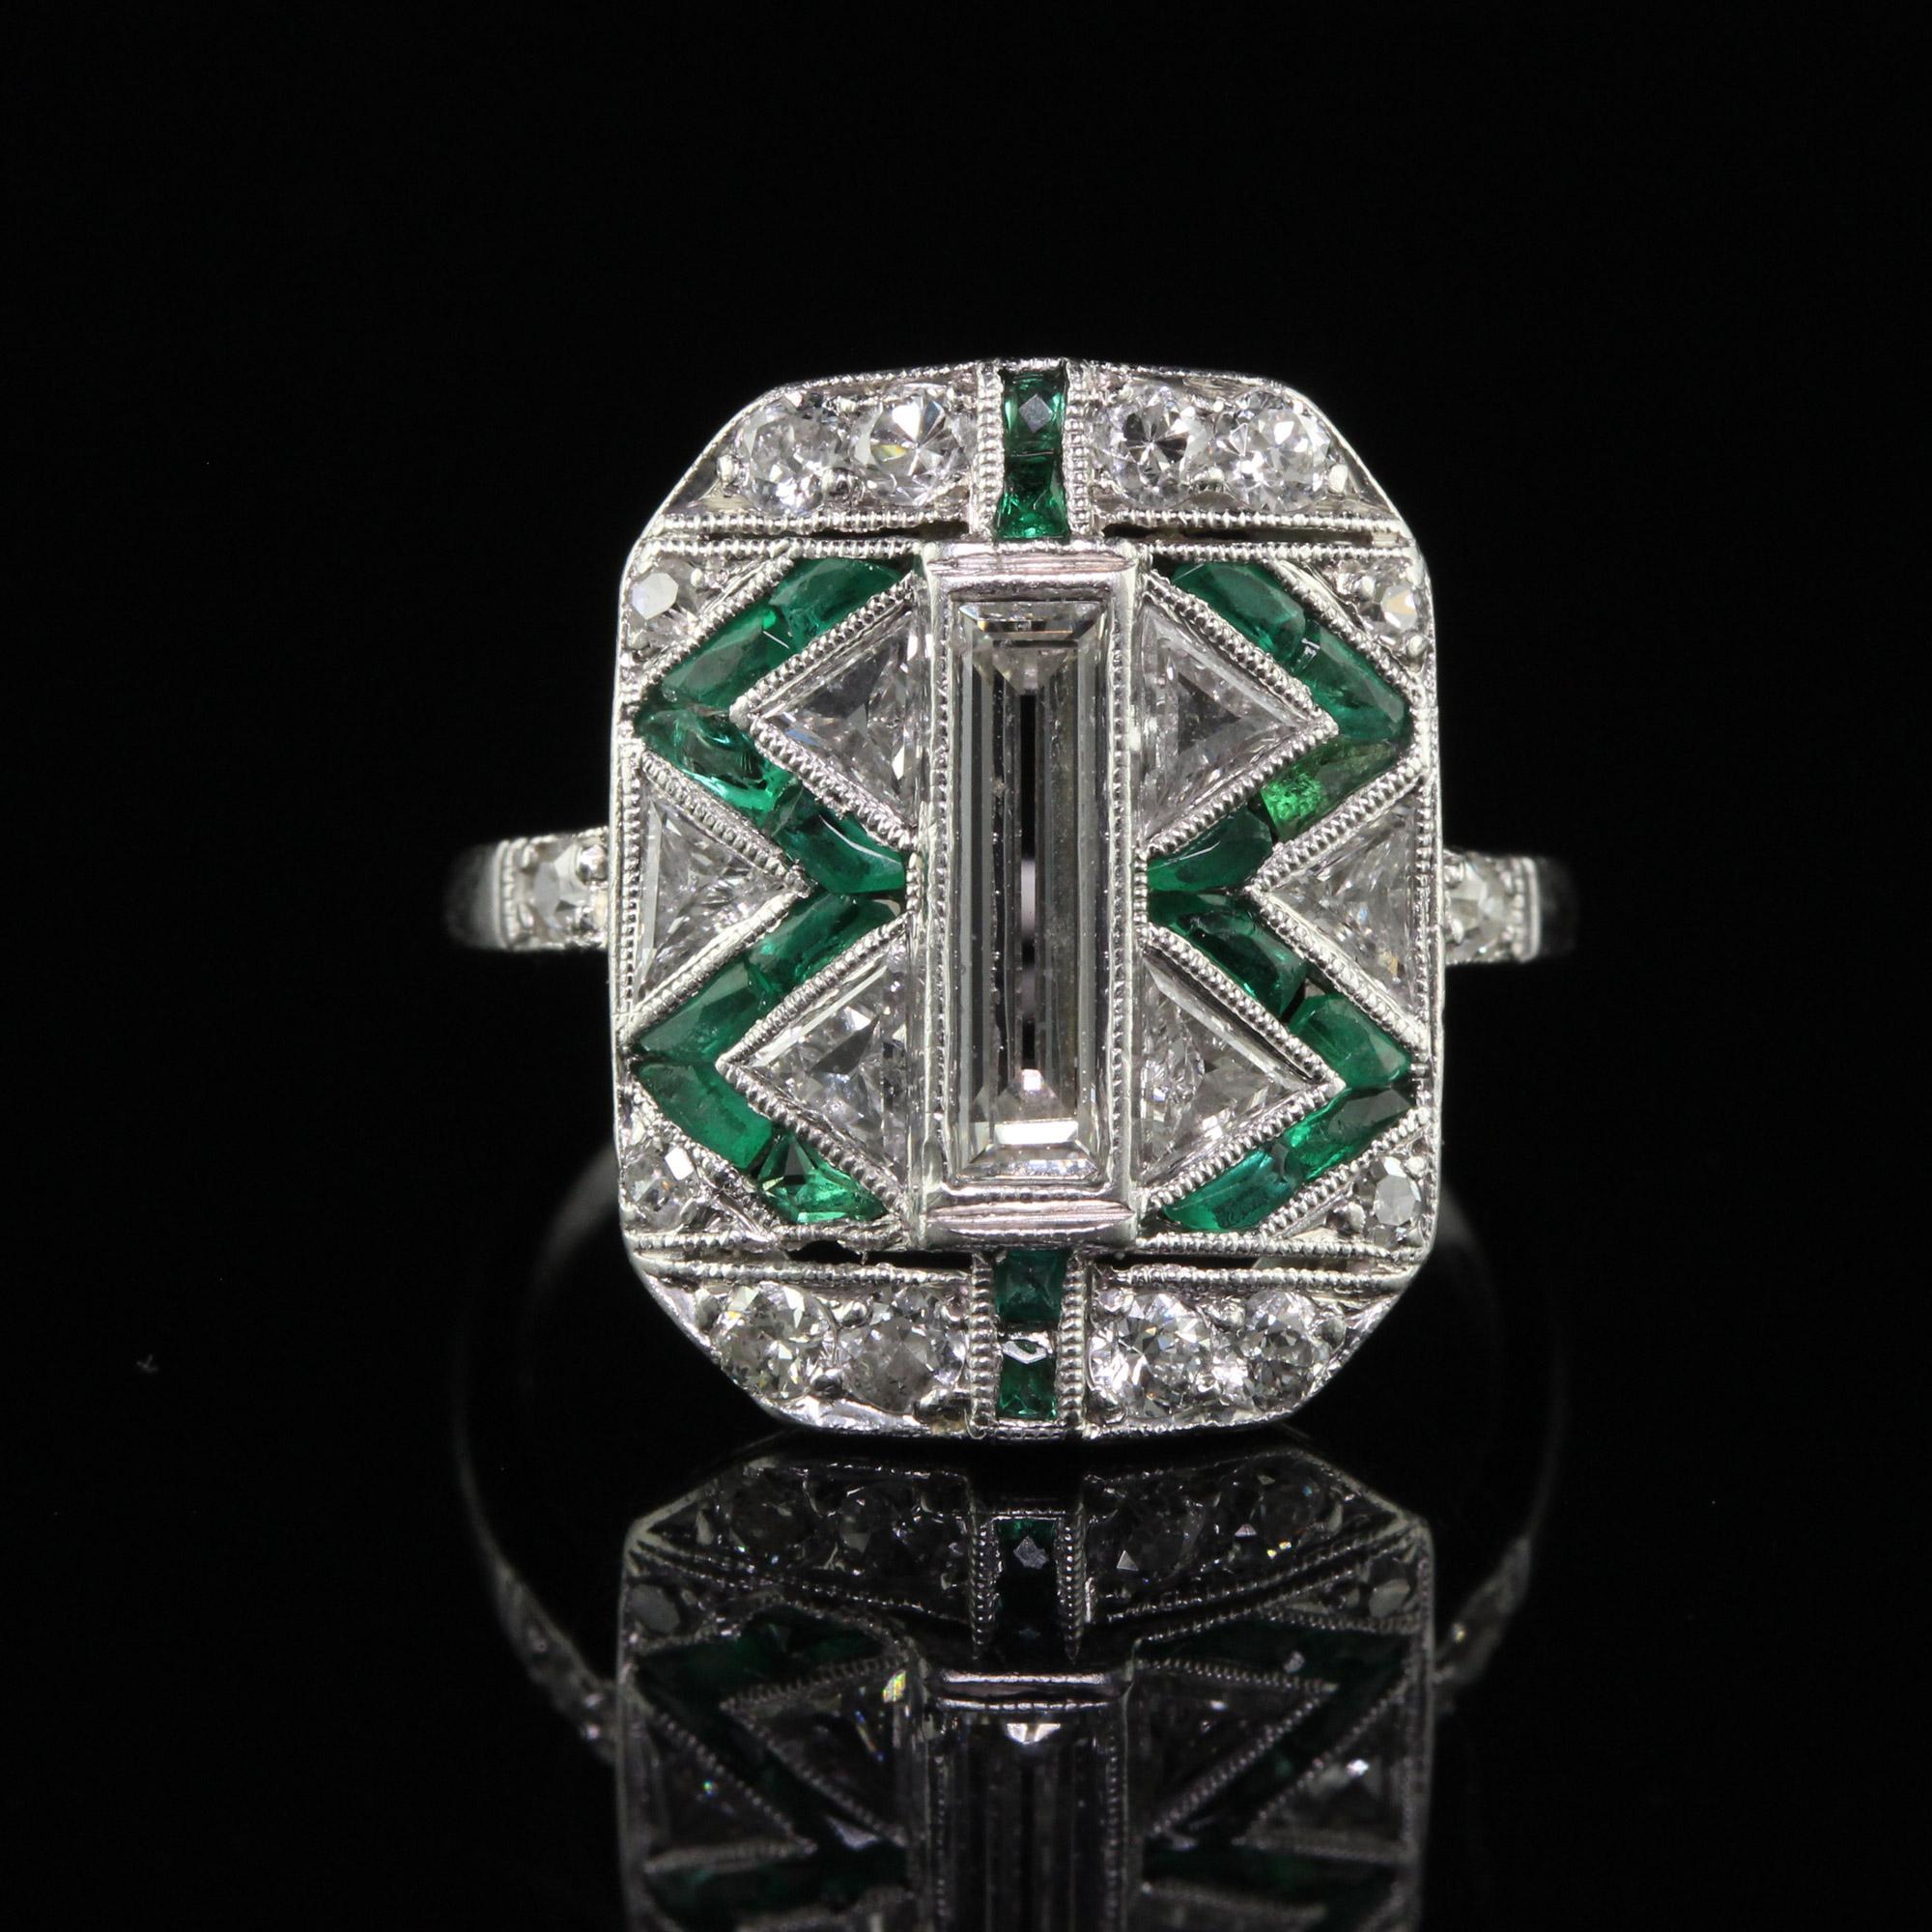 Antique Art Deco Cartier Old Baguette Diamond and Emerald Cocktail Ring For Sale 2